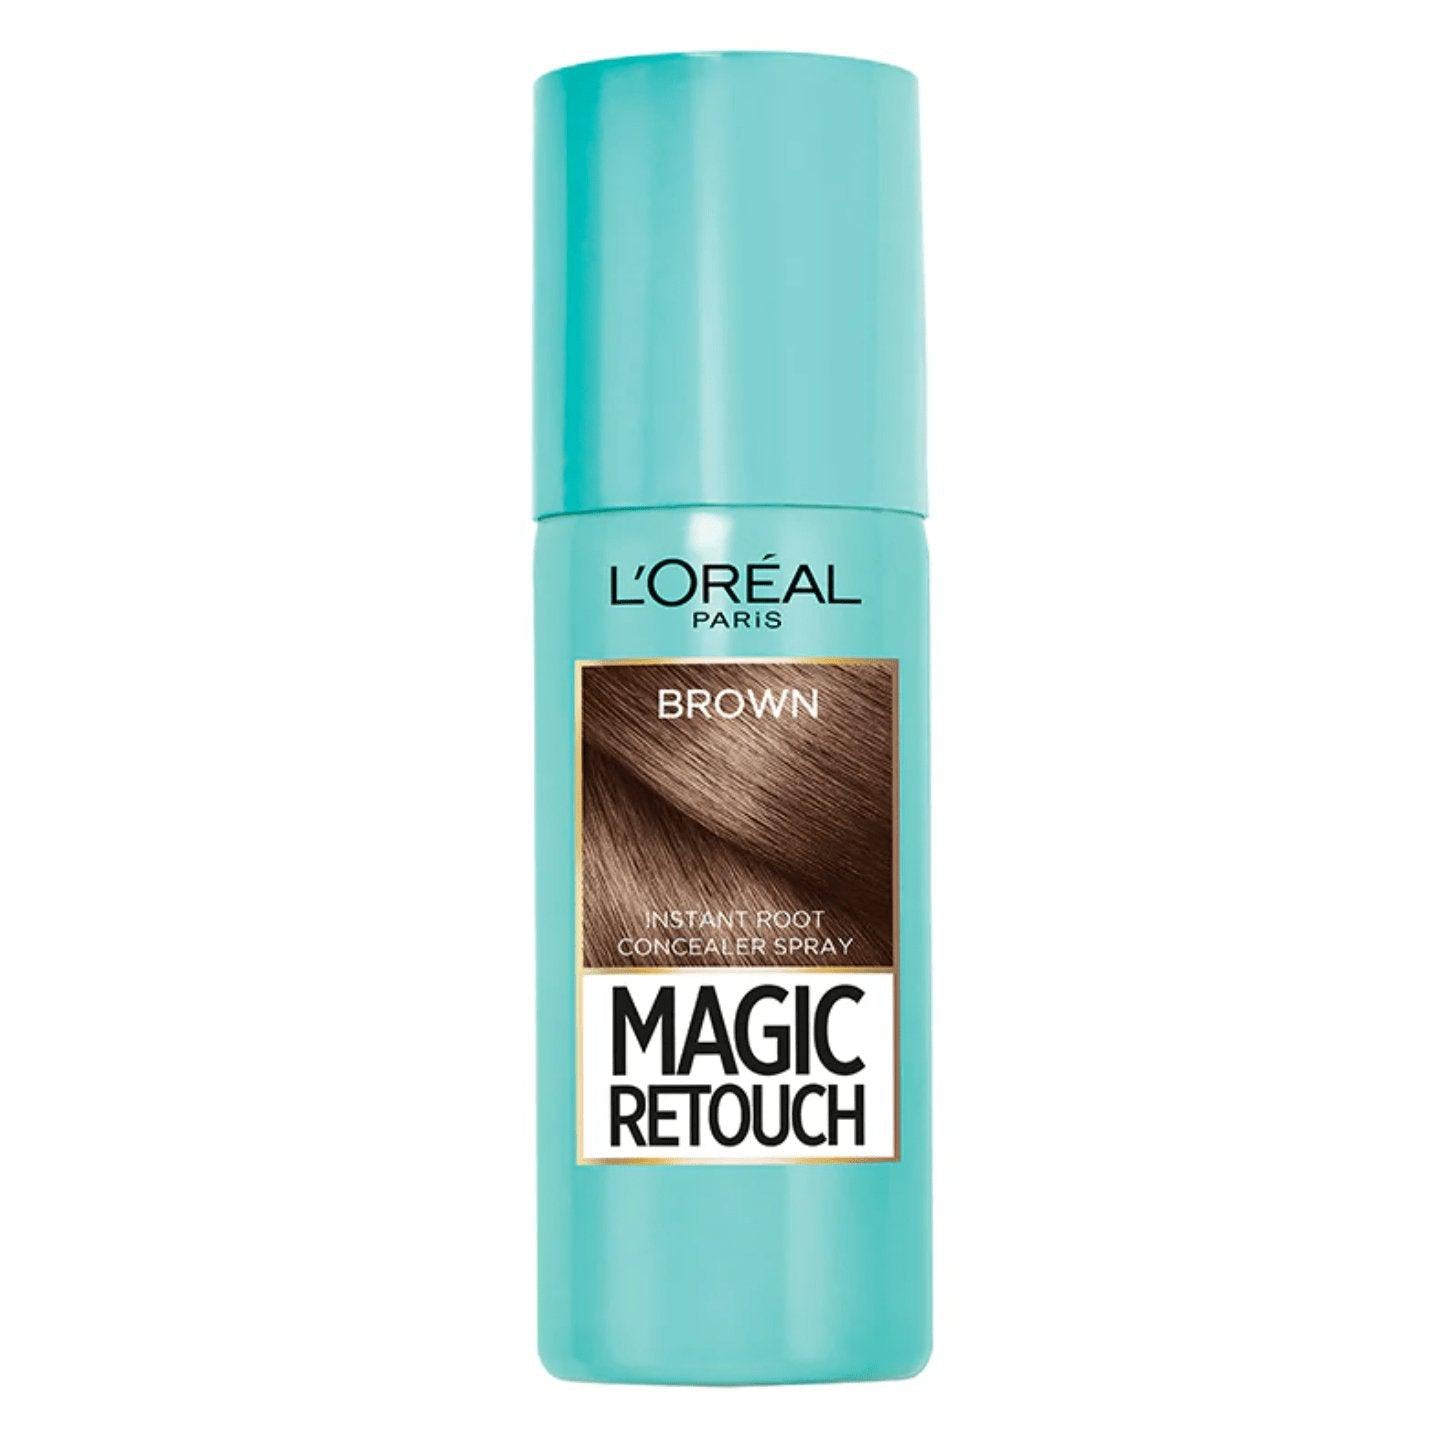 L’oreal Magic Retouch Temporary Instant Grey Root Concealer Spray - Brown, 75ml - Healthxpress.ie